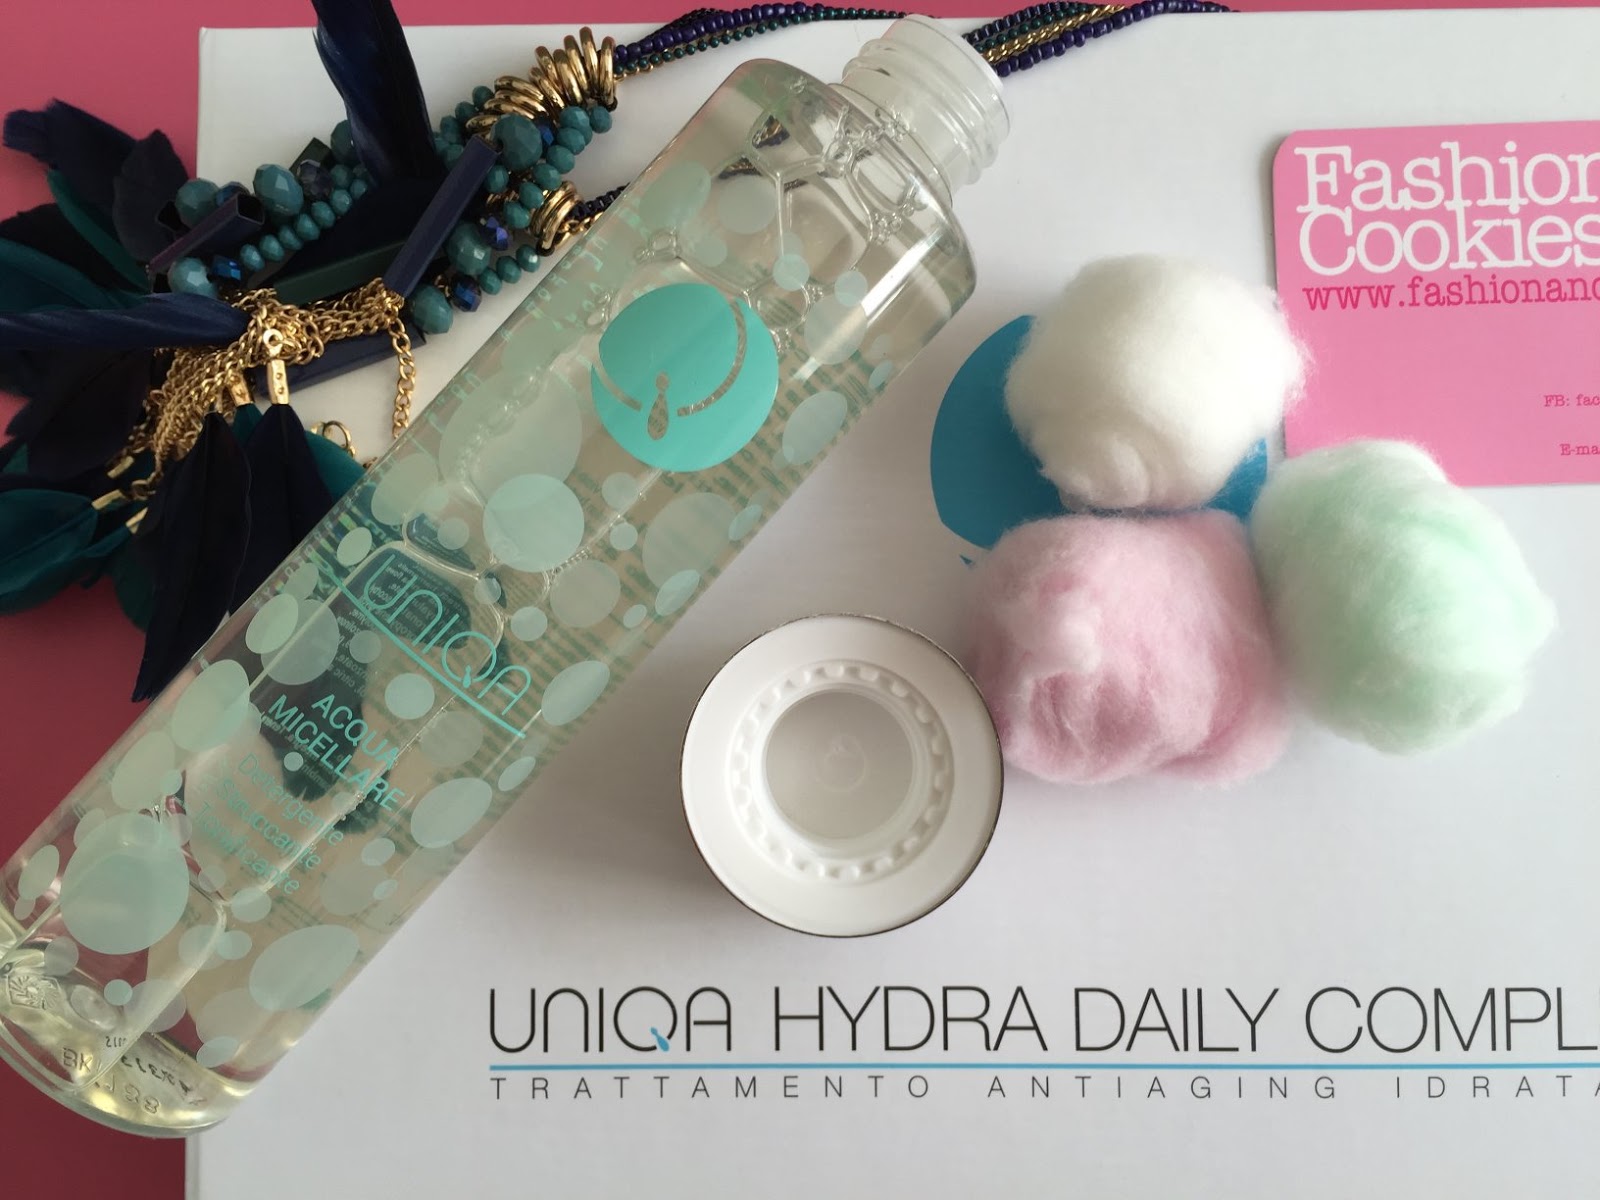 Uniqa by Pea Cosmetics Micellar Water, skincare treatment review on Fashion and Cookies beauty blog, beauty blogger